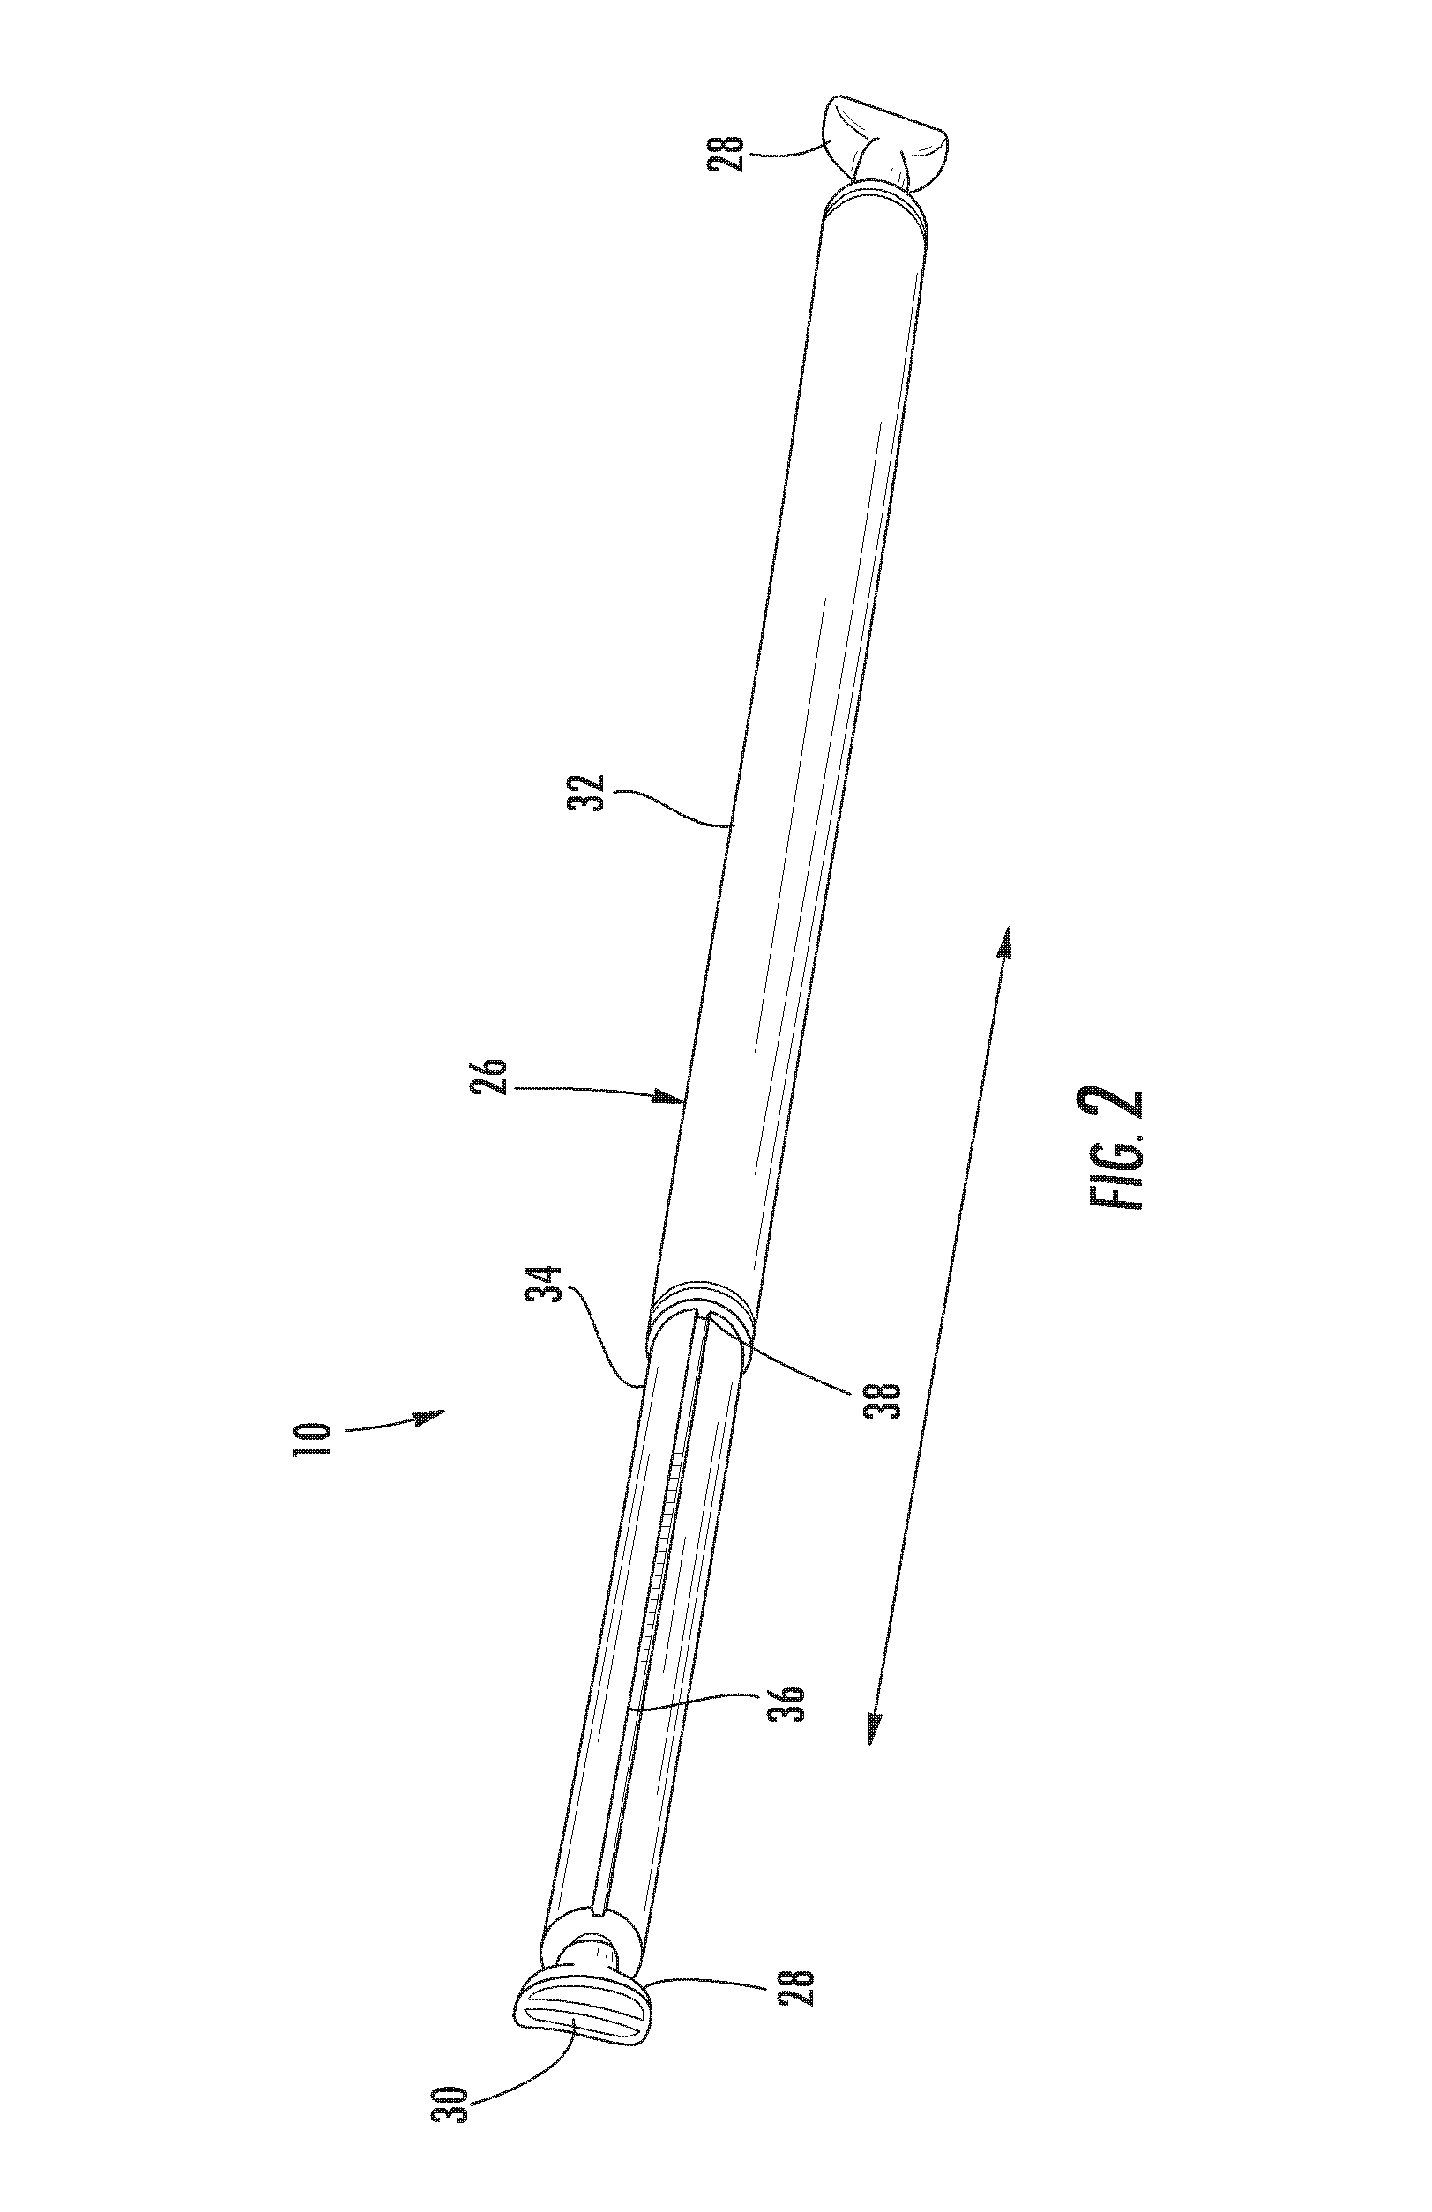 Adjustable tension shade assembly